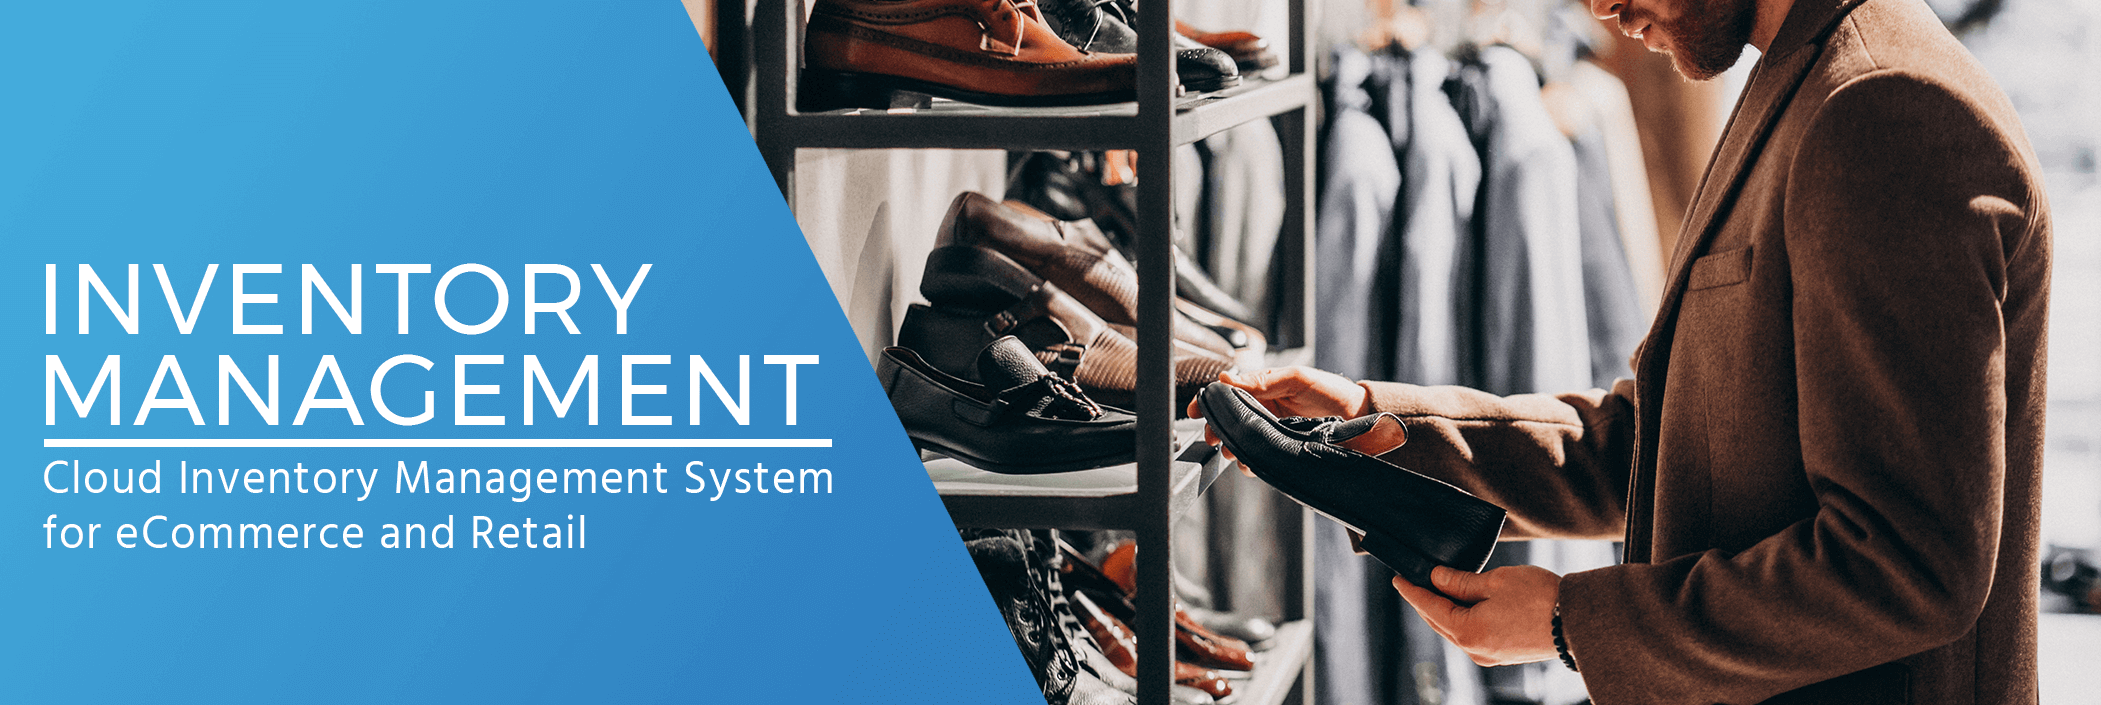 Inventory Management for ecommerce and retail header image